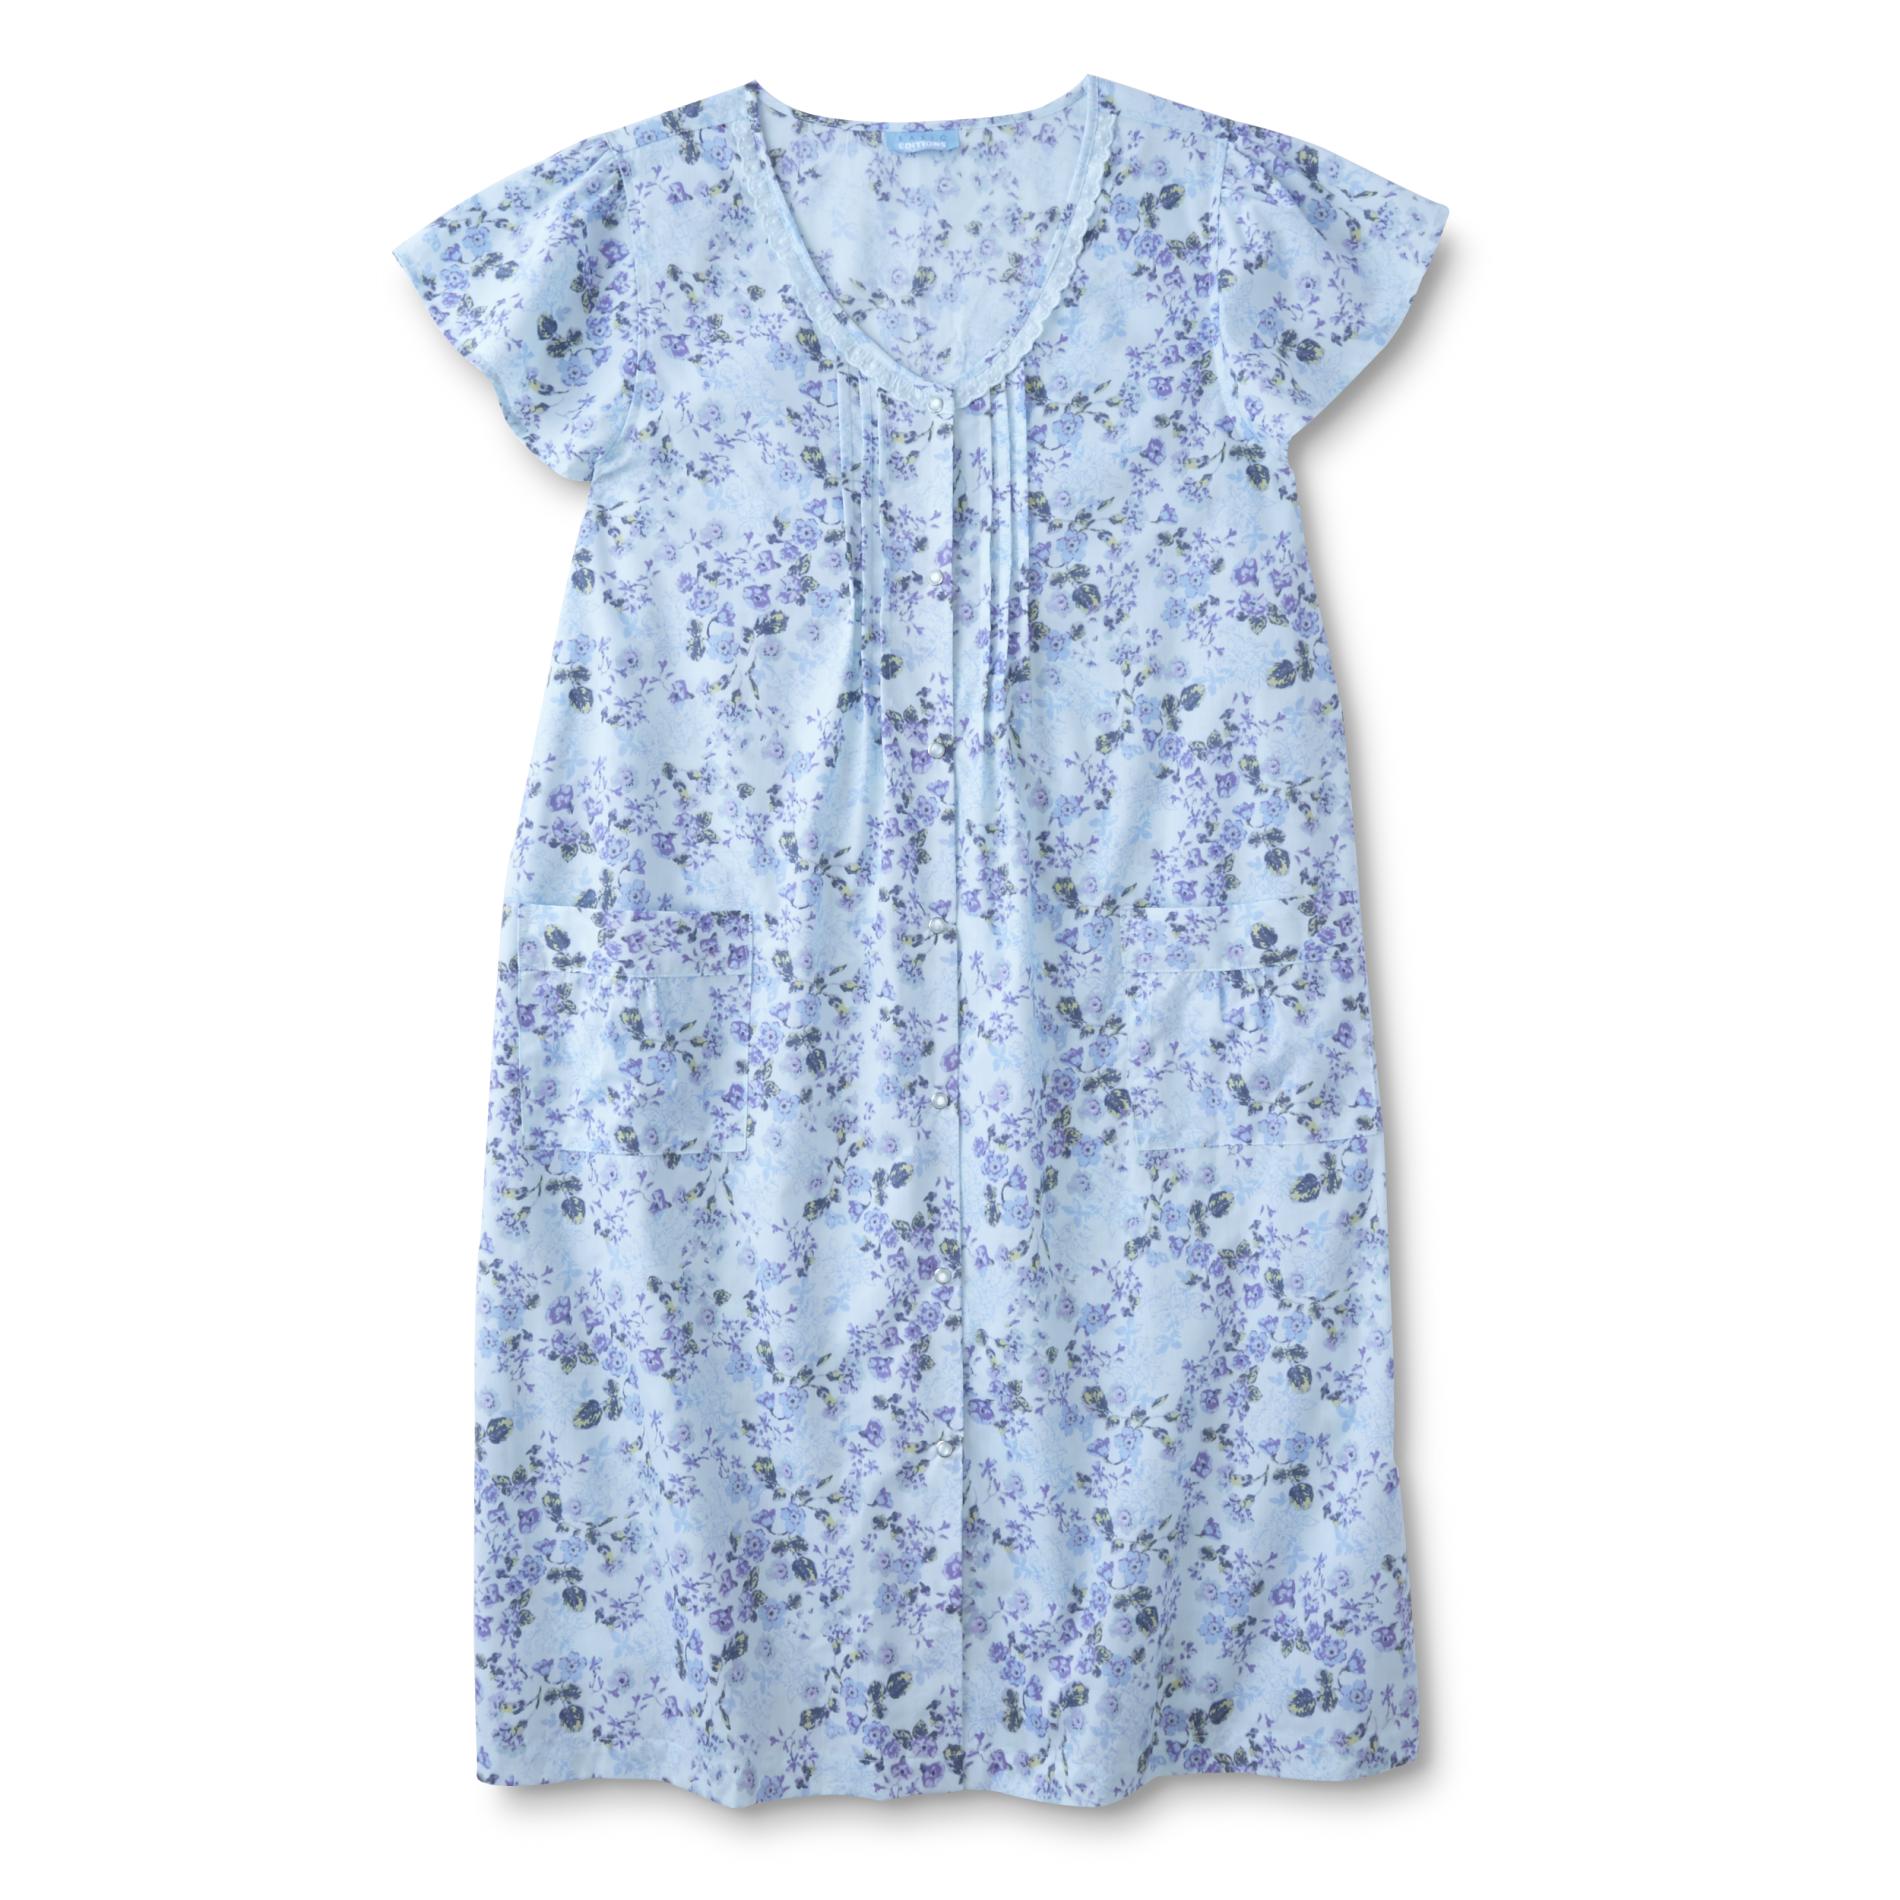 Basic Editions Women's Lounge Dress - Floral